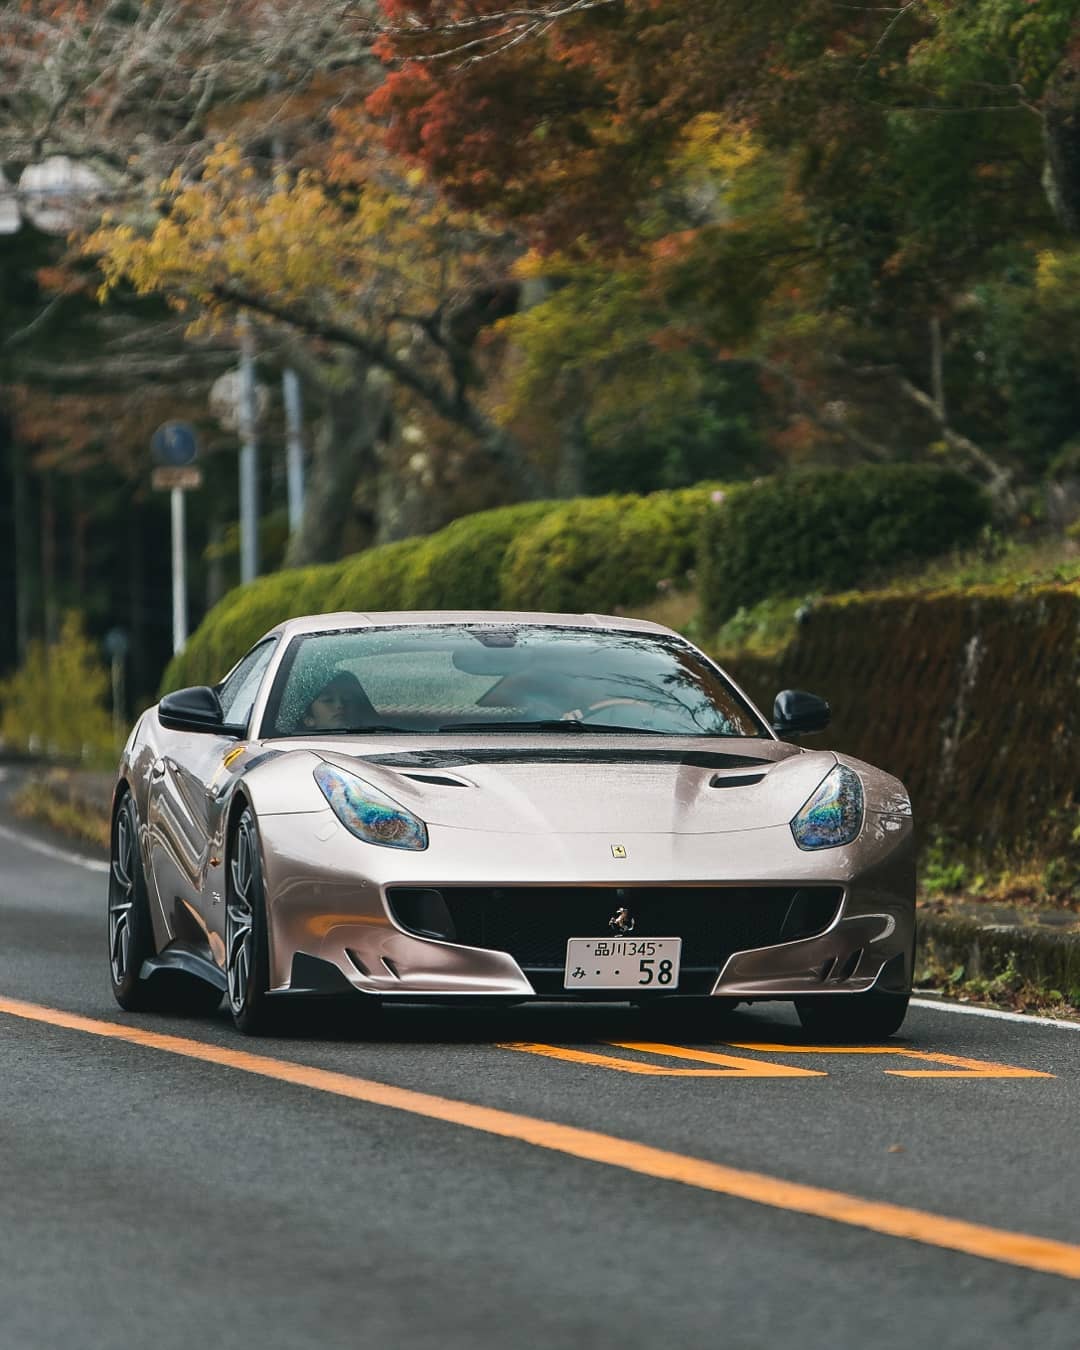 Could This Be The Best Looking Ferrari F12 Tdf Ever